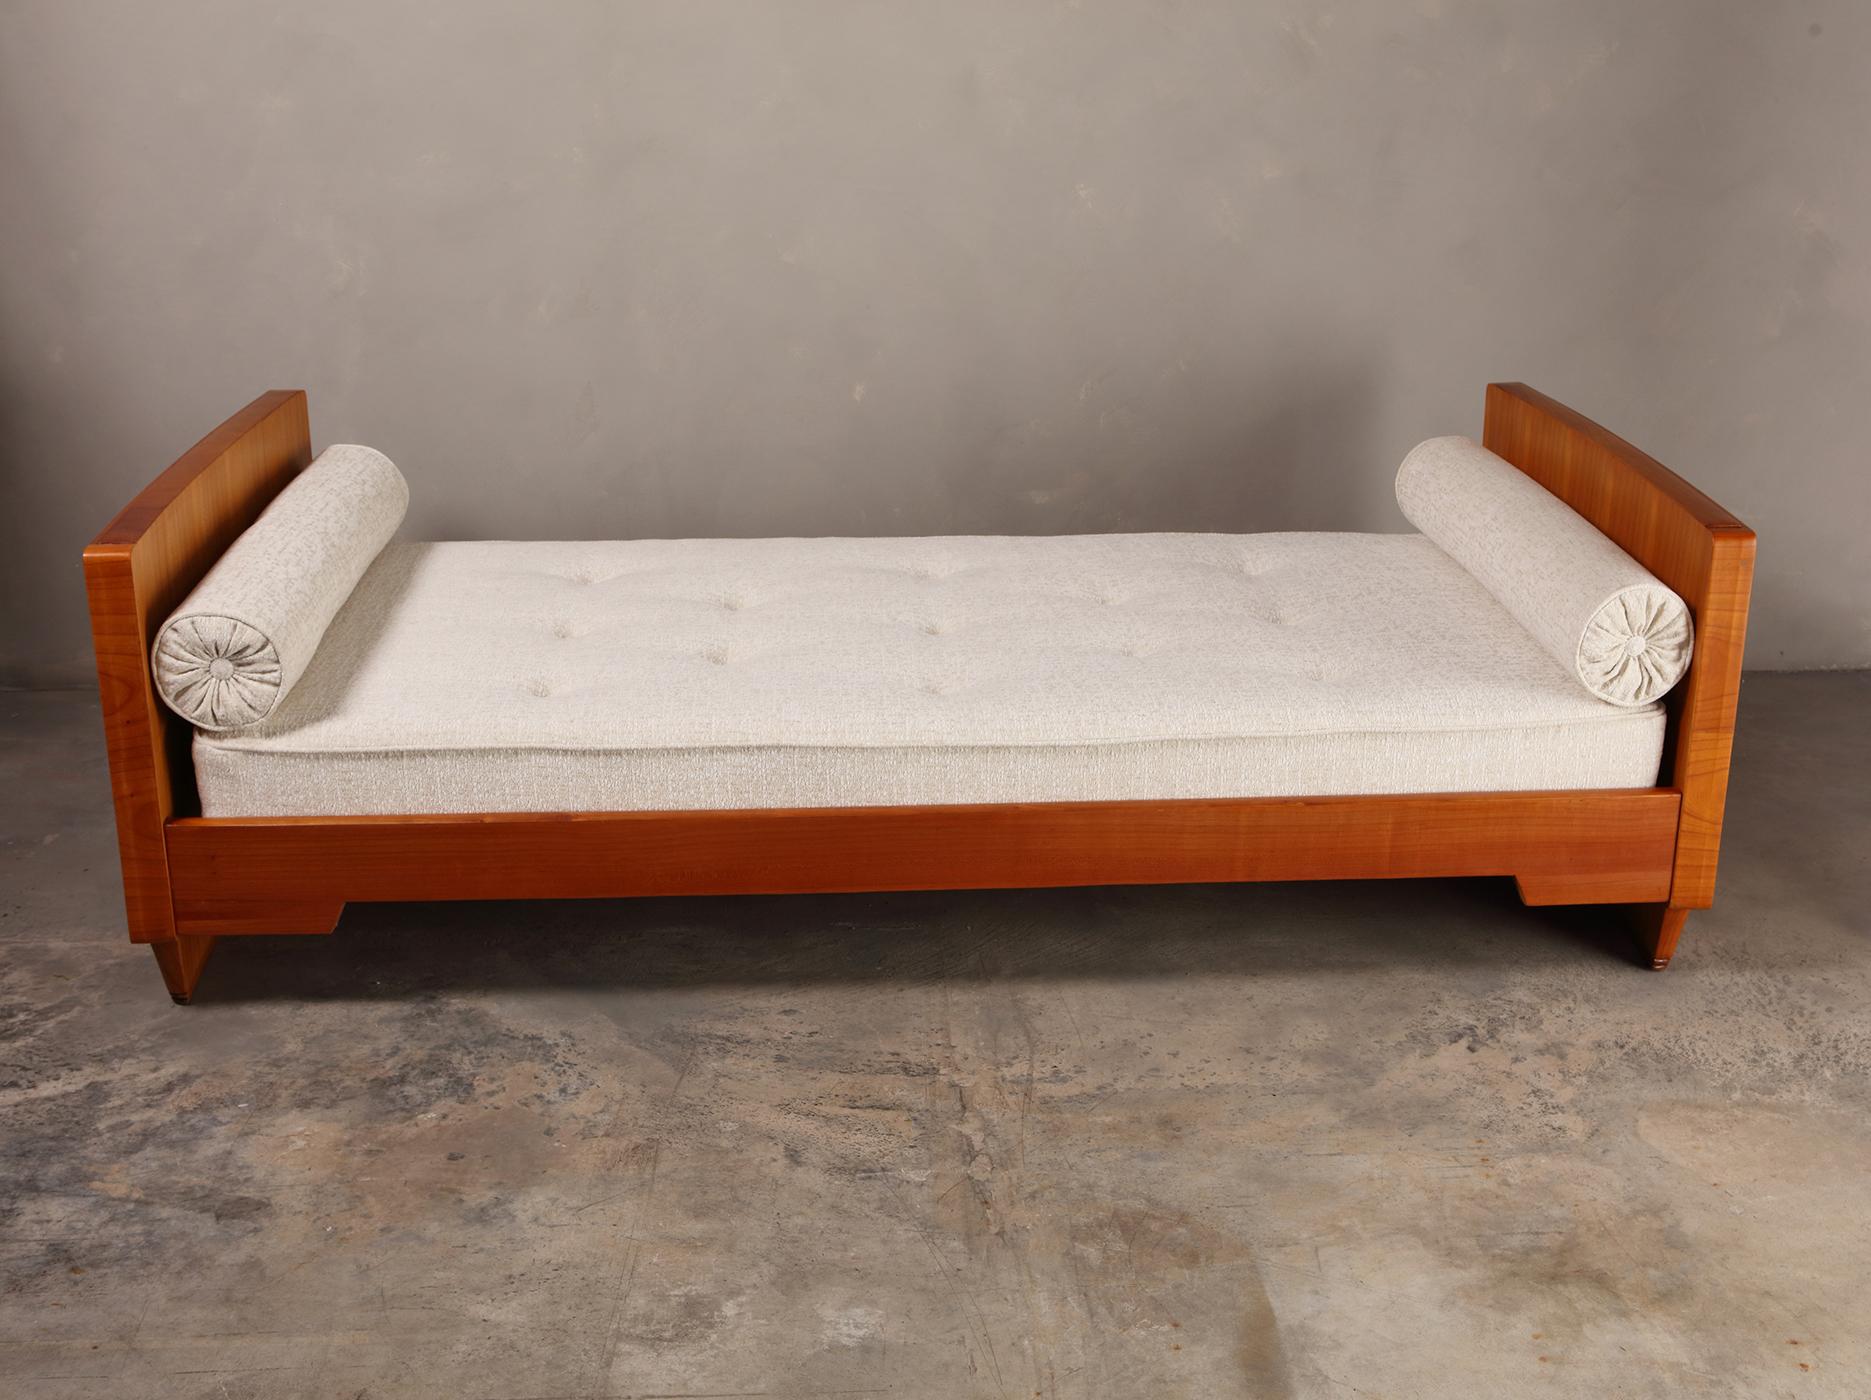 Stunning Paolo Buffa Daybed circa 1940s in cherry wood with hand painted design on the sides.